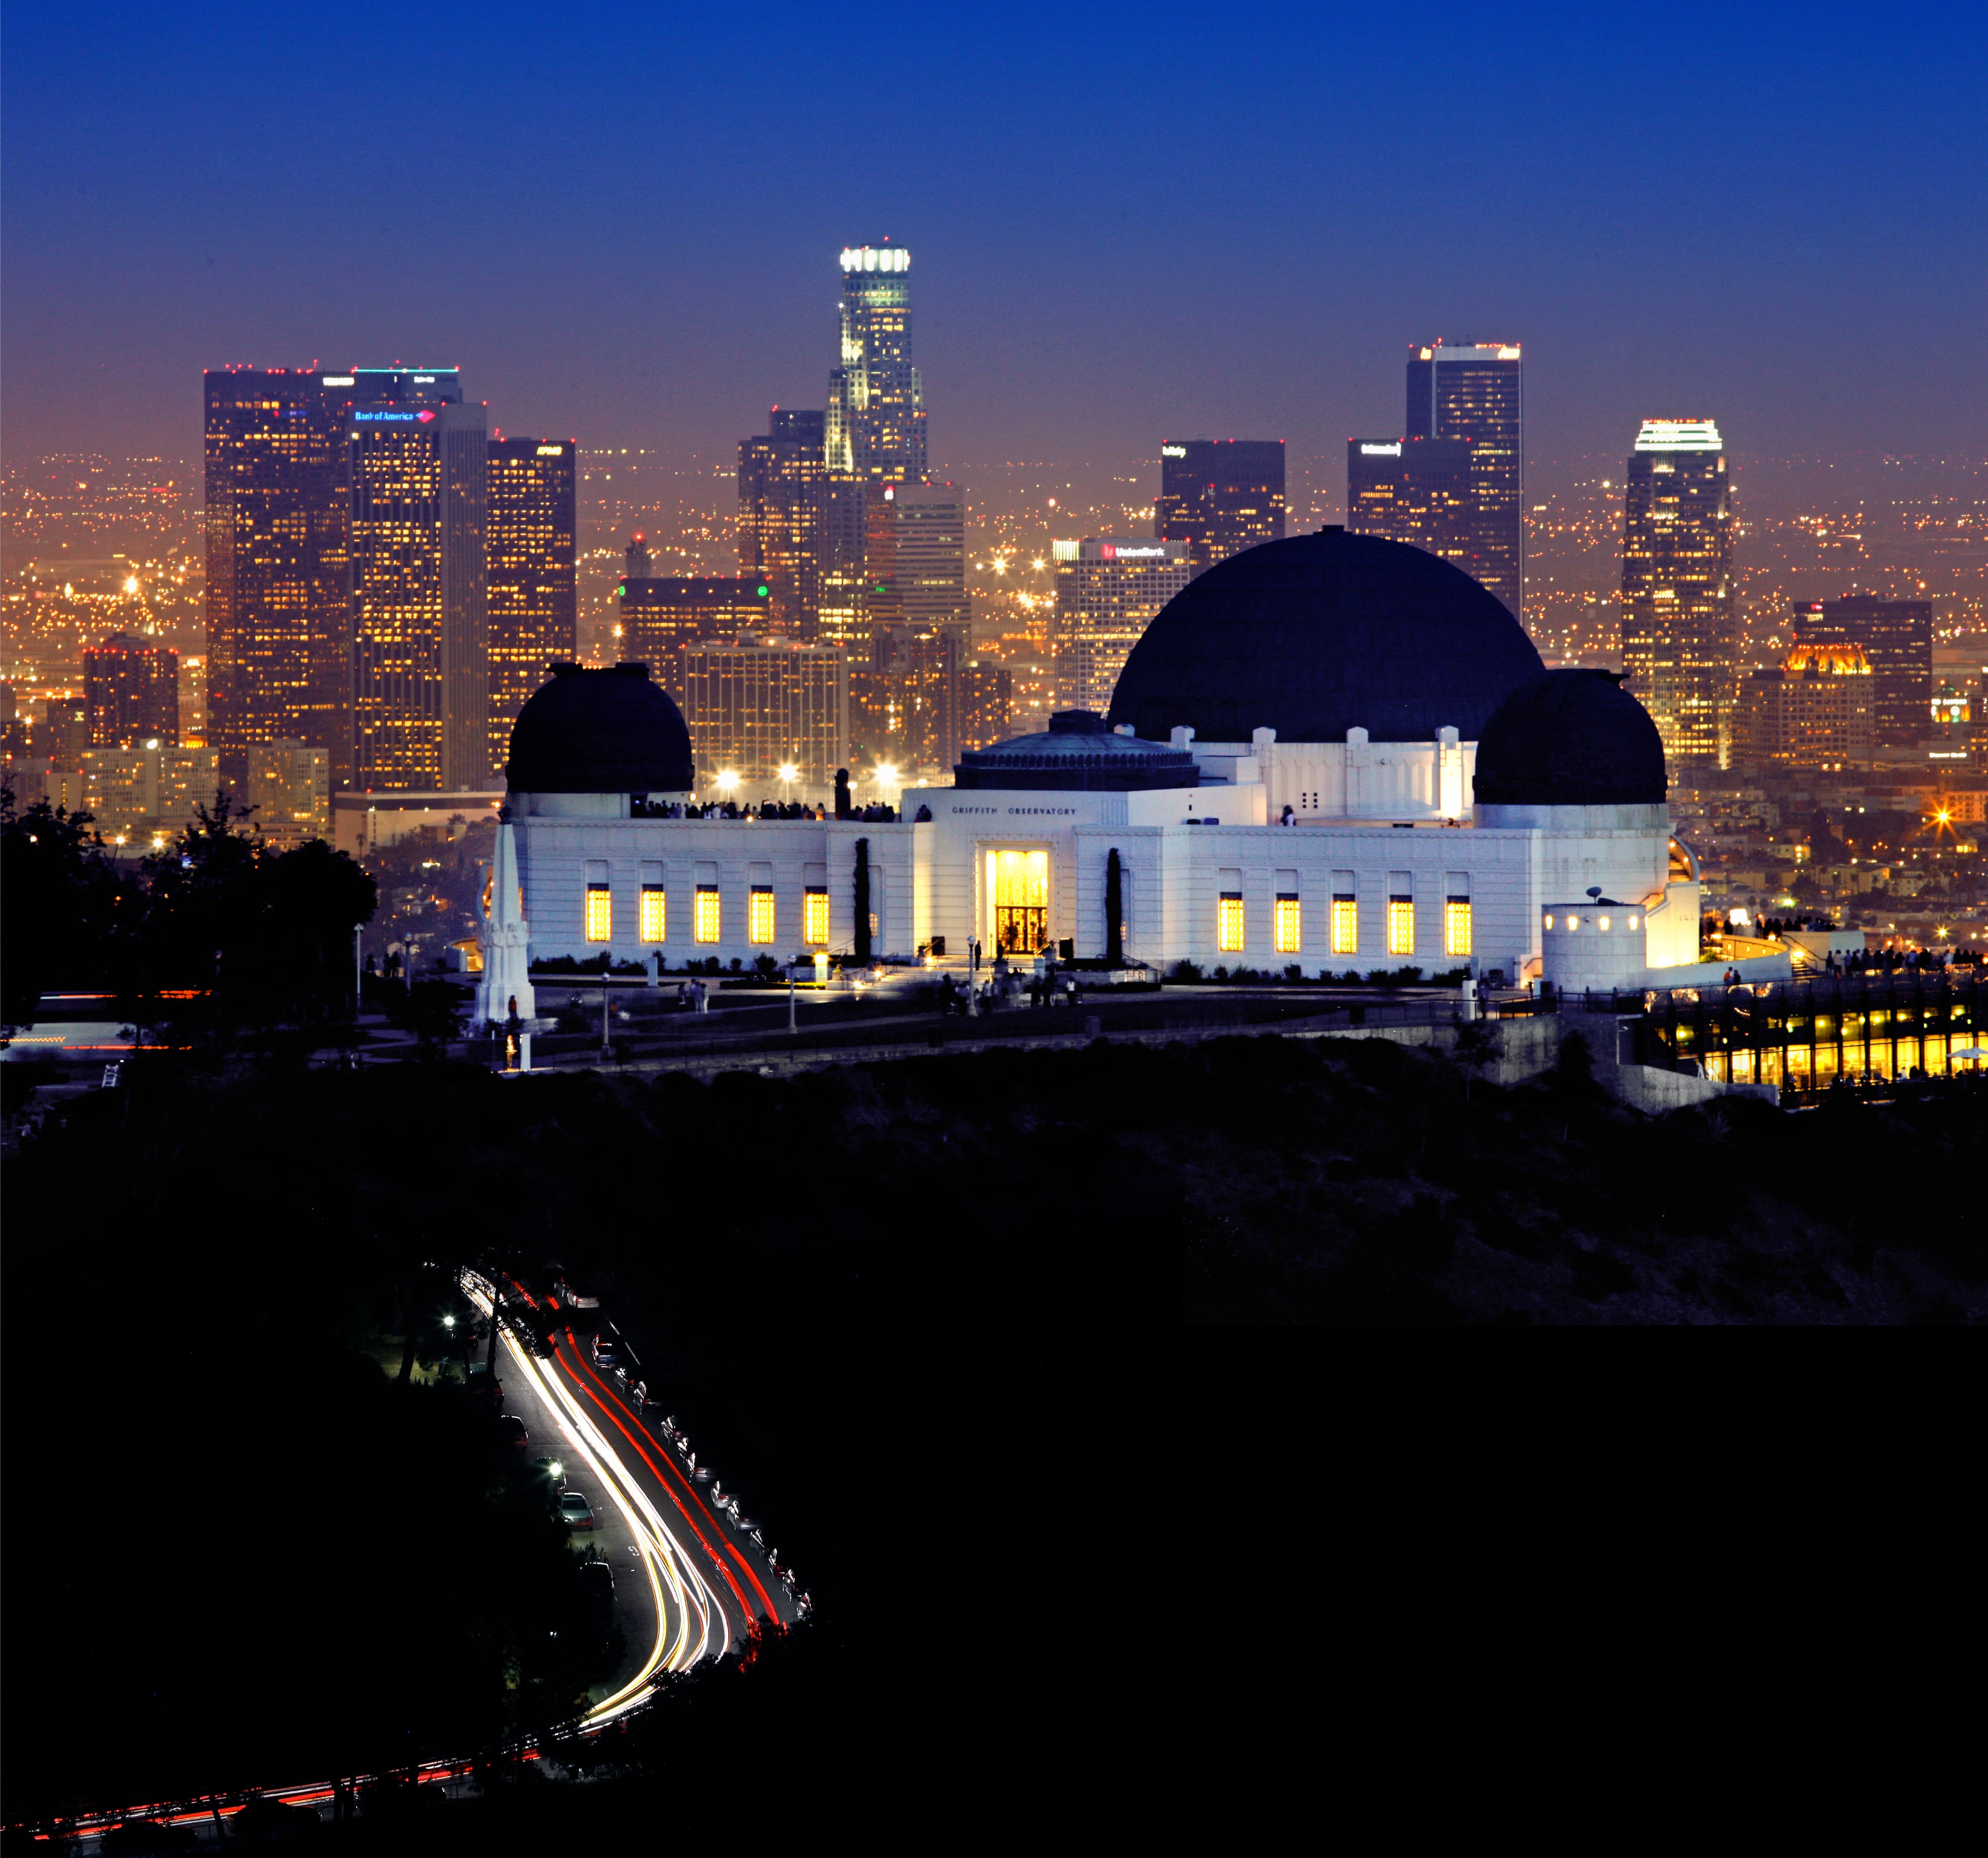 Griffith Observatory in Los Angeles at night